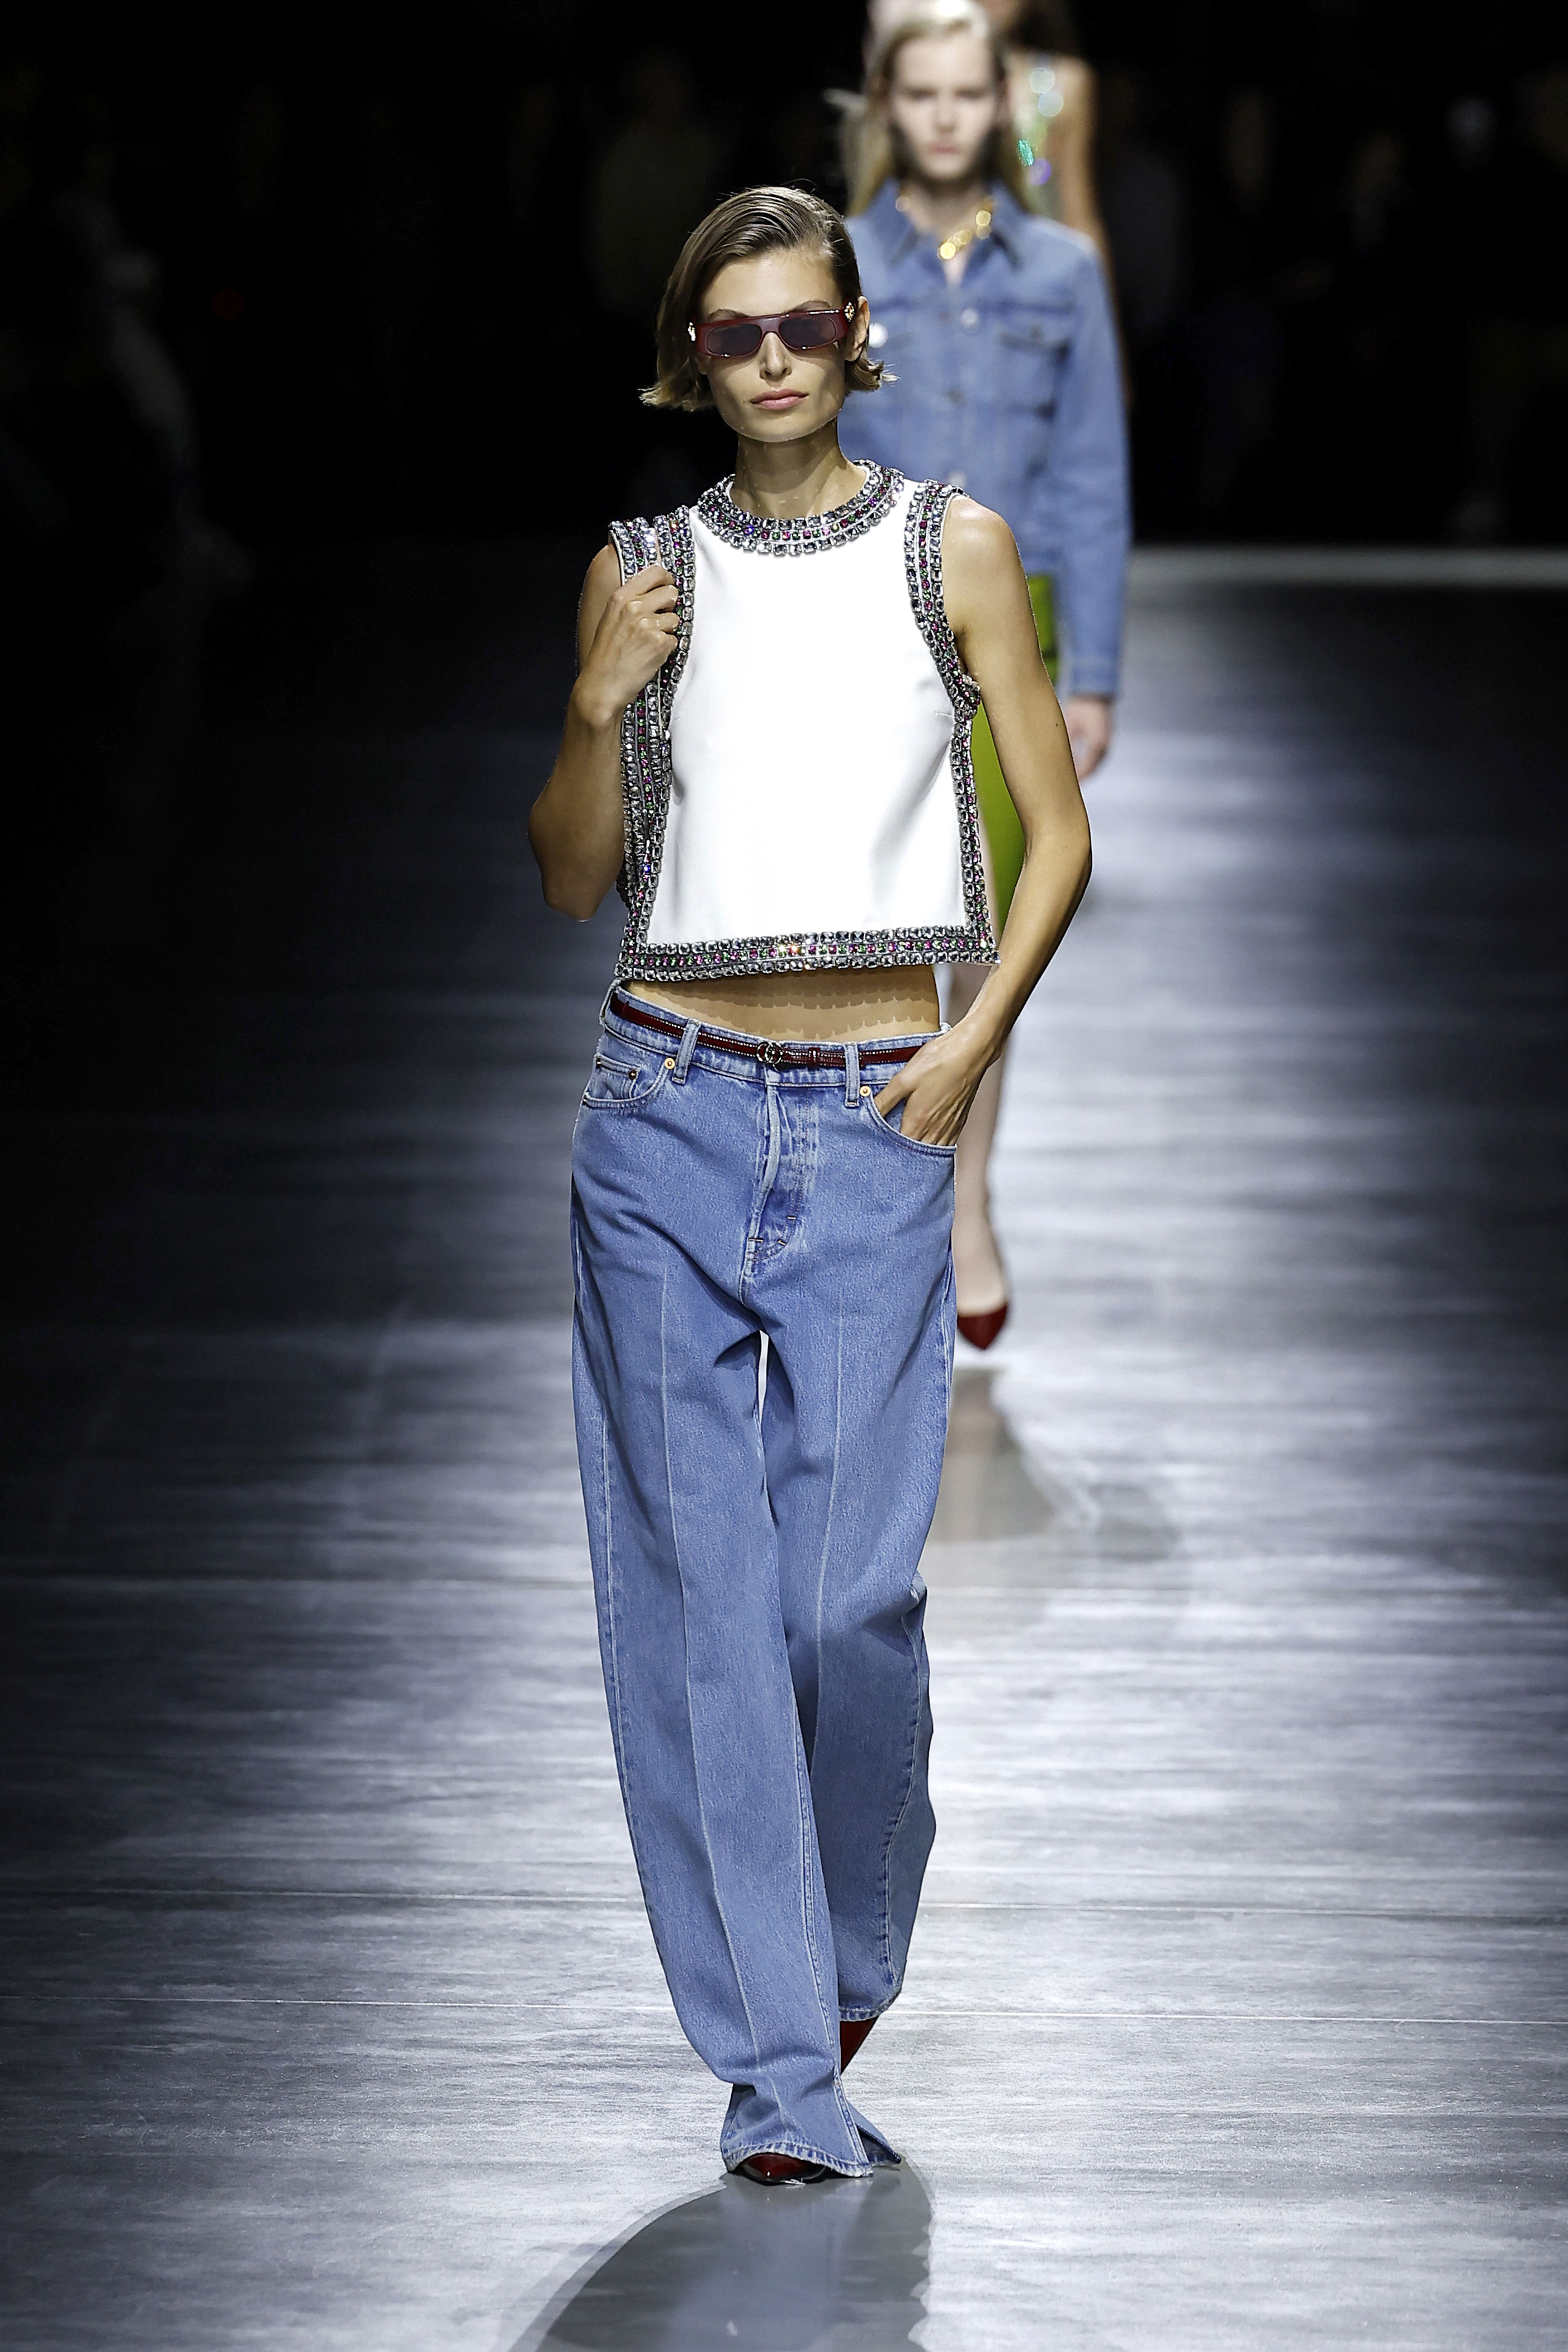 10 cute summer outfit ideas inspired by the runways